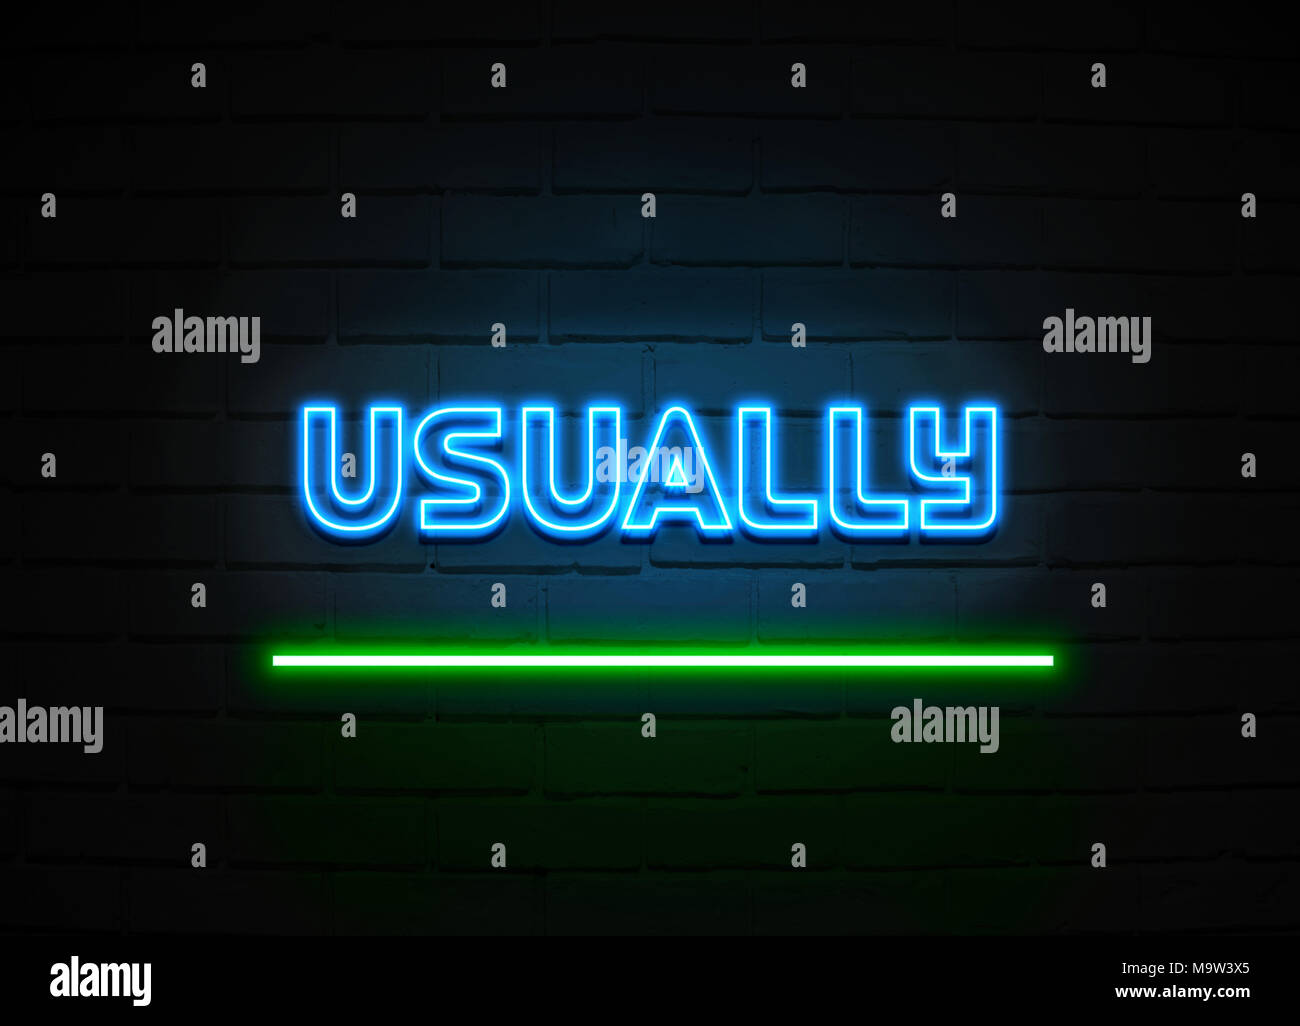 Usually neon sign - Glowing Neon Sign on brickwall wall - 3D rendered royalty free stock illustration. Stock Photo